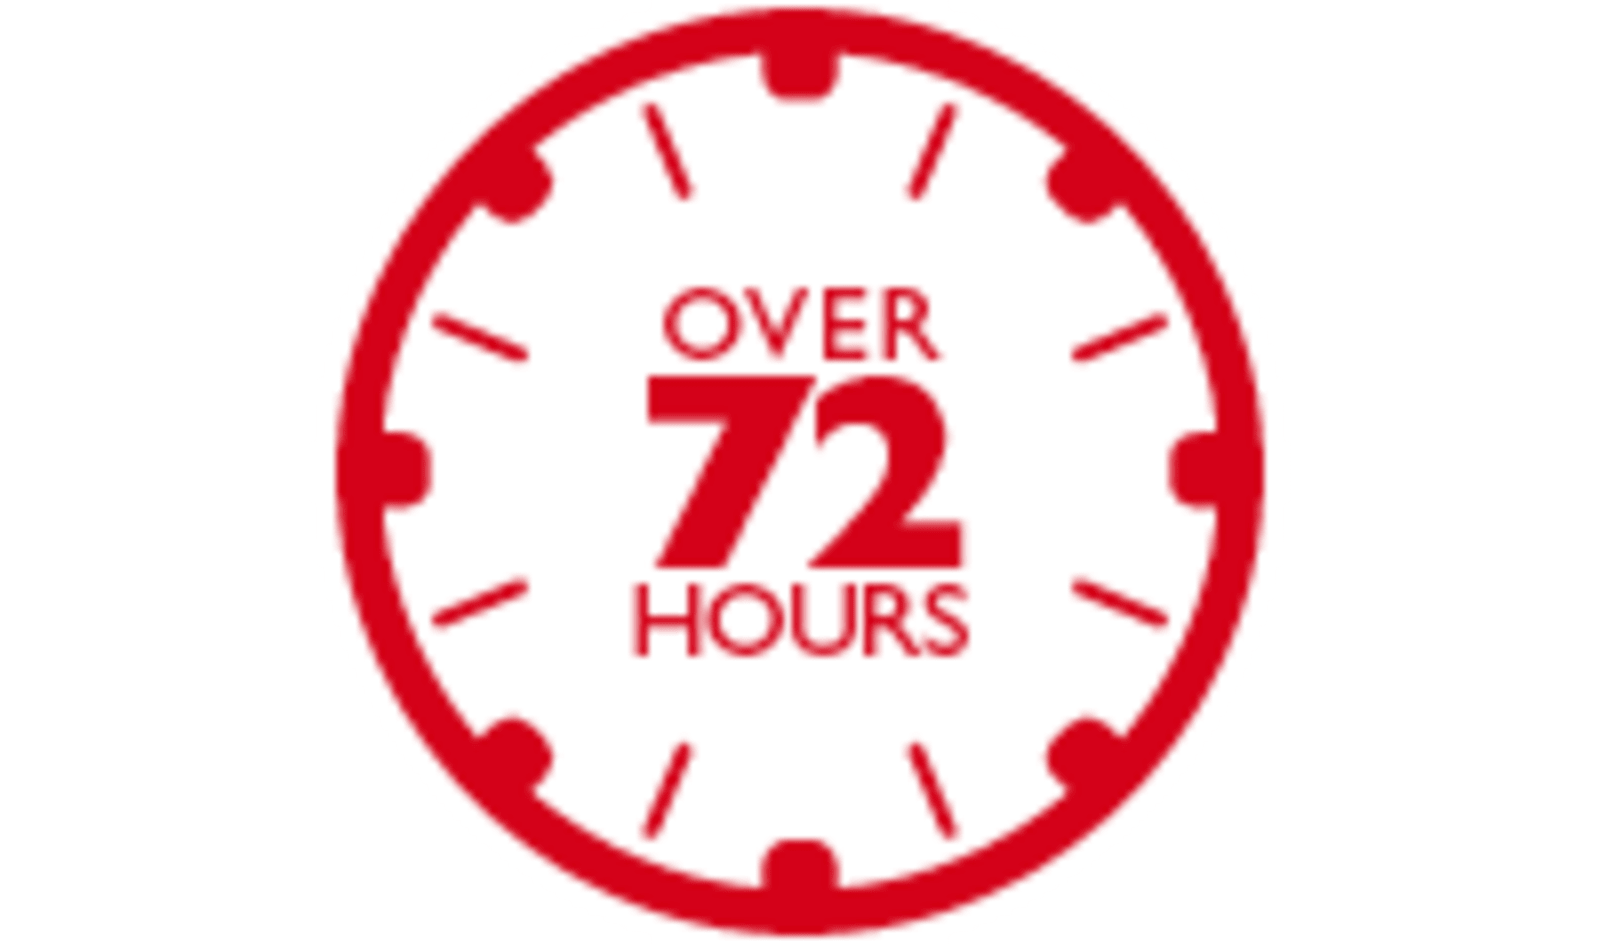 Clock icon - over 72 hours